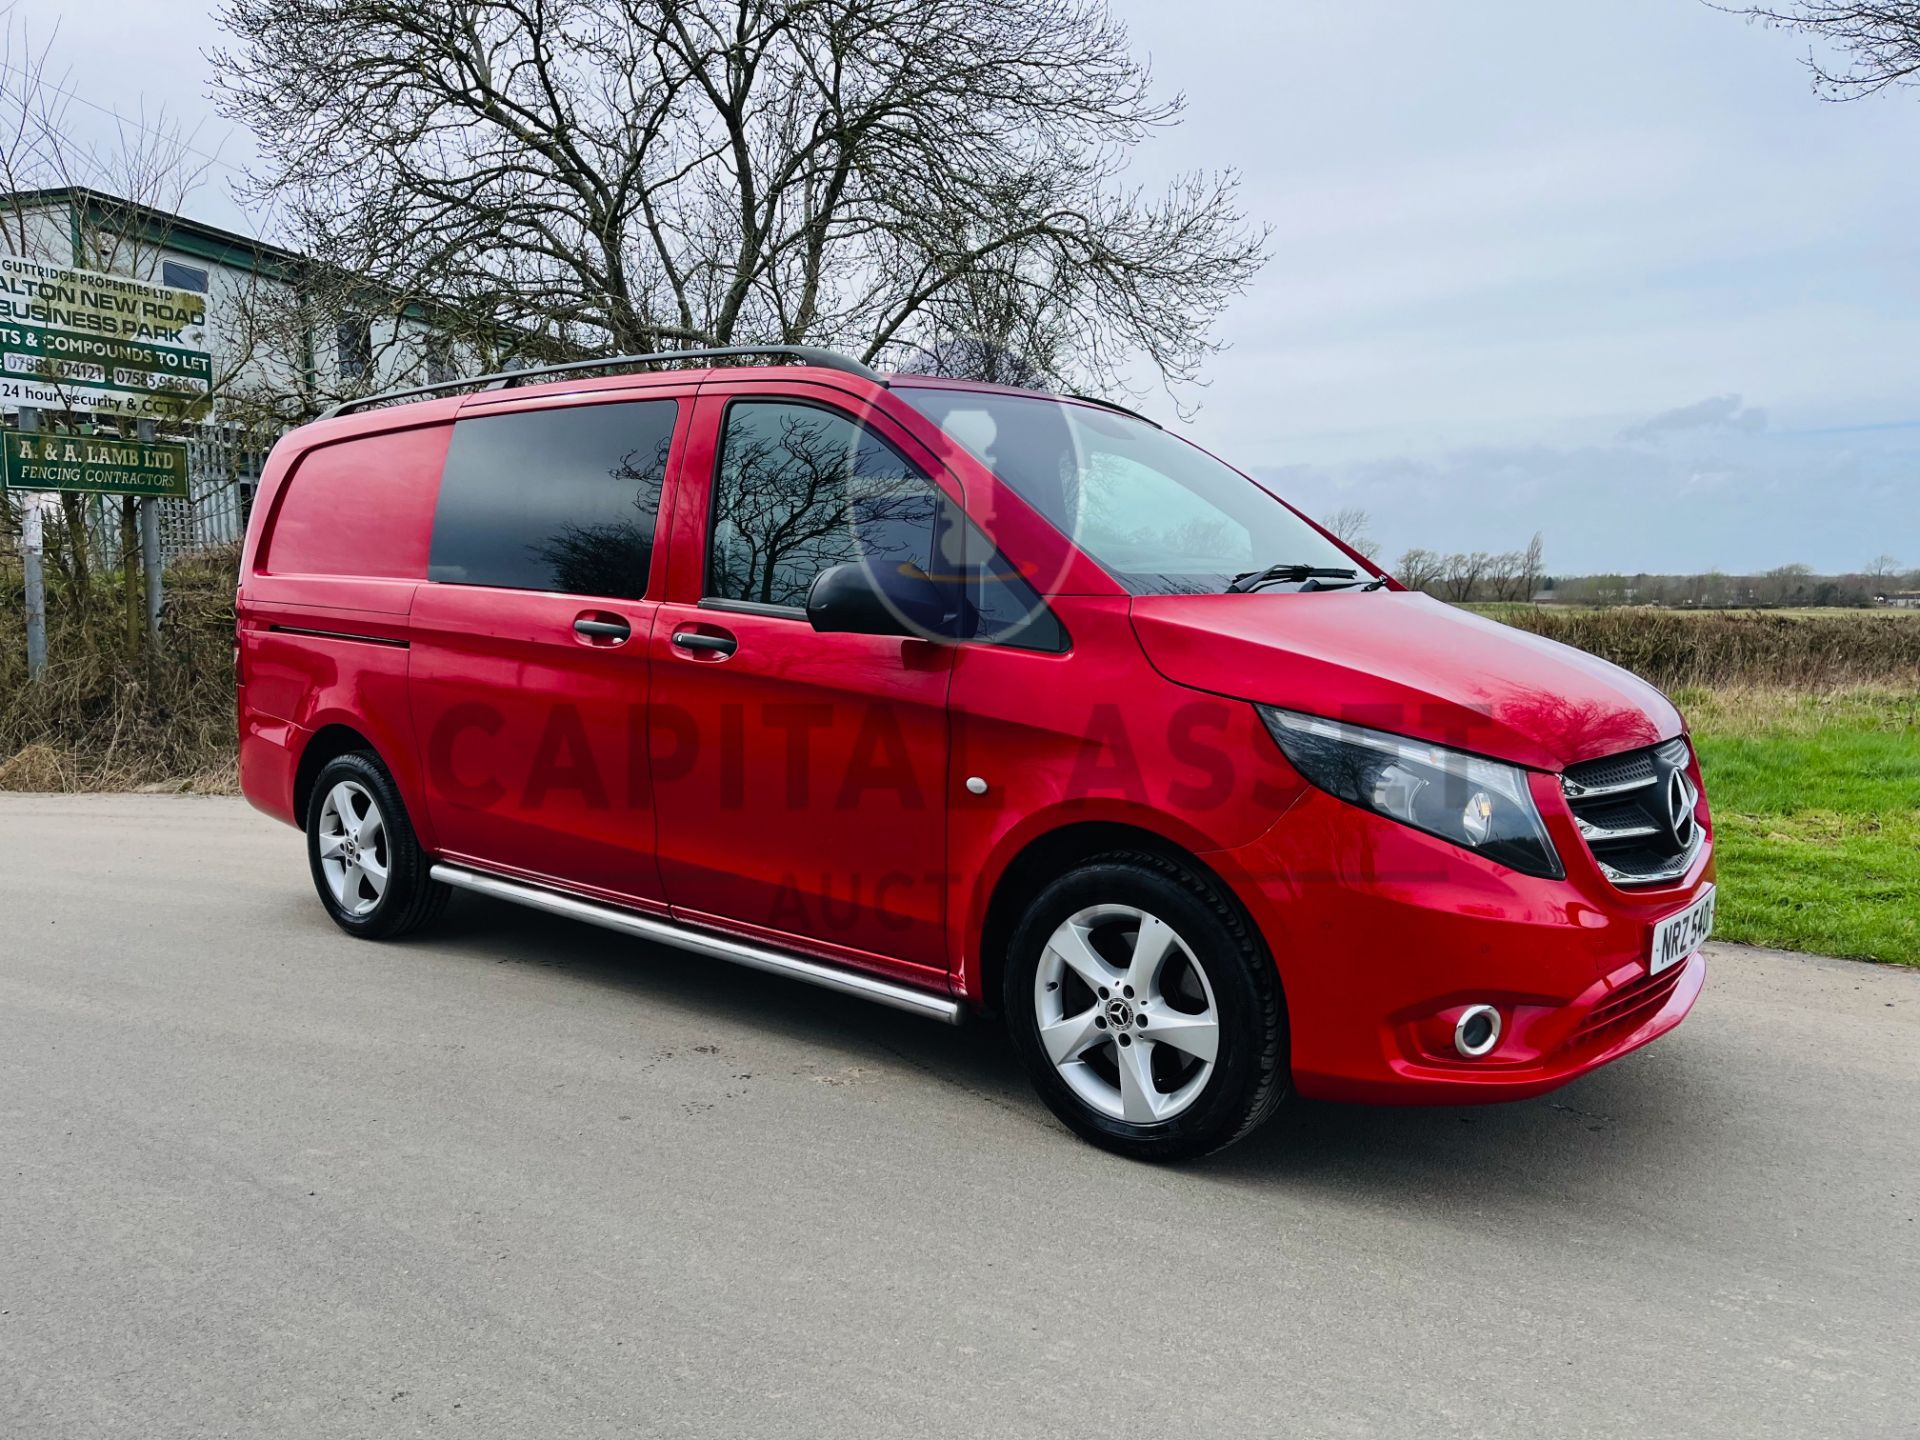 MERCEDES VITO 119CDI "SPORT" 7G-AUTO LWB DUALINER / 5 SEATER (2018 REG) ONLY 28K MILES (NO VAT) - Image 2 of 35